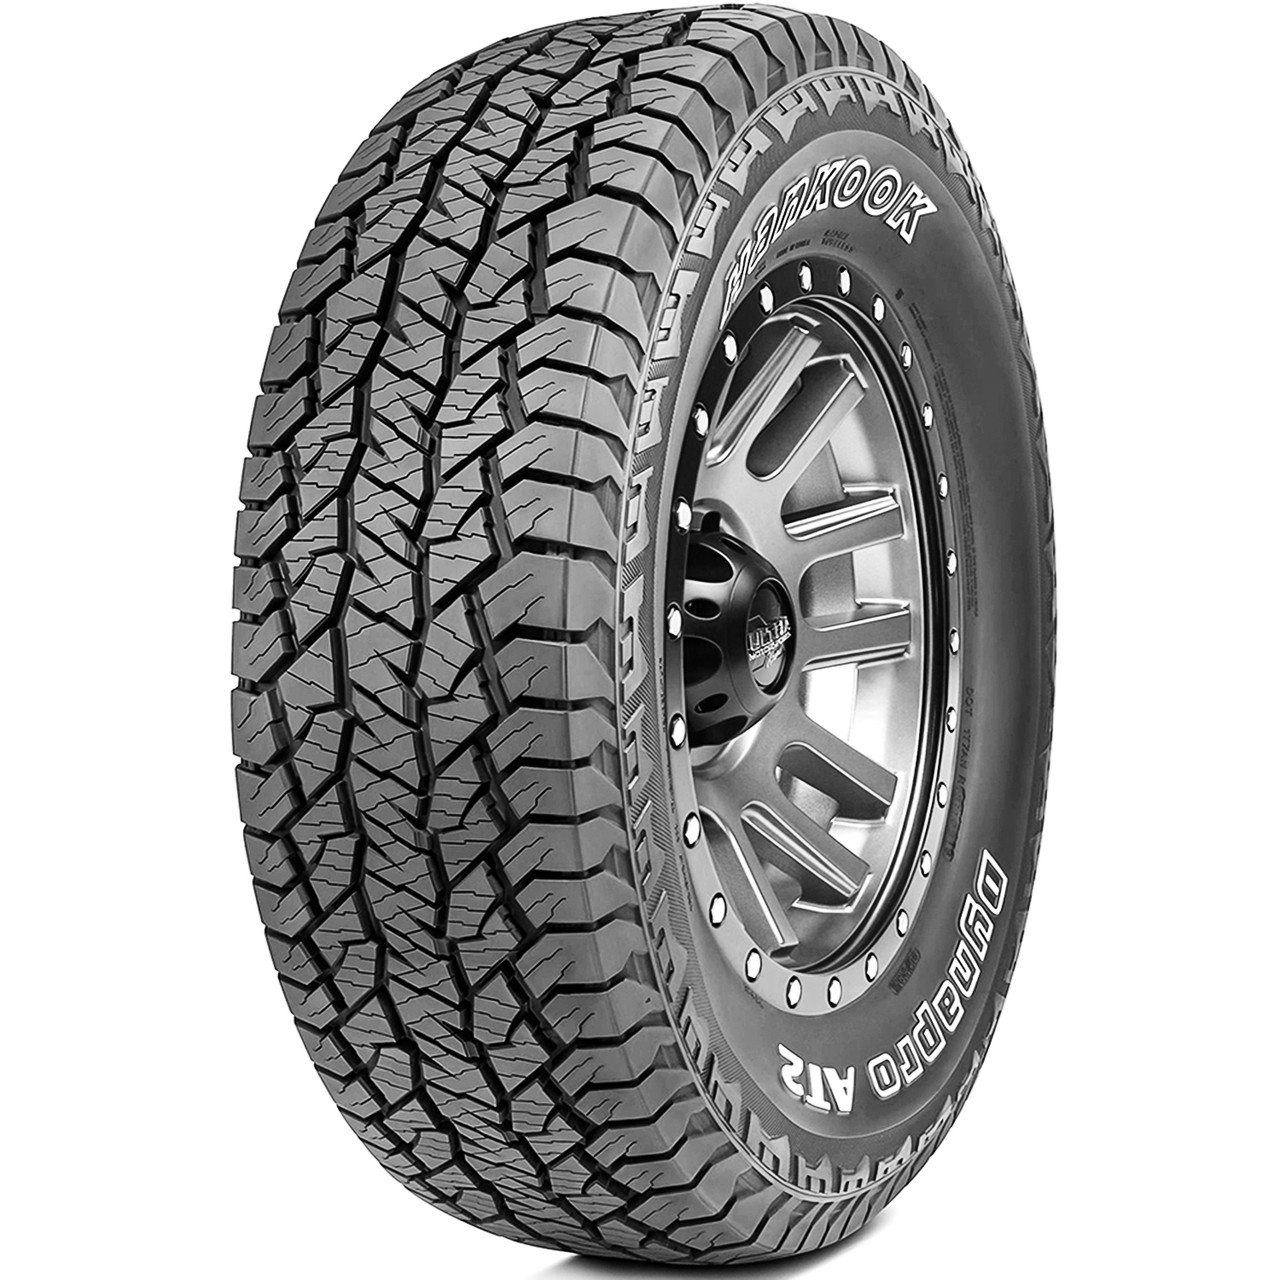 Photos - Motorcycle Tyre Hankook Dynapro AT2 265/75R16, All Season, All Terrain tires. 